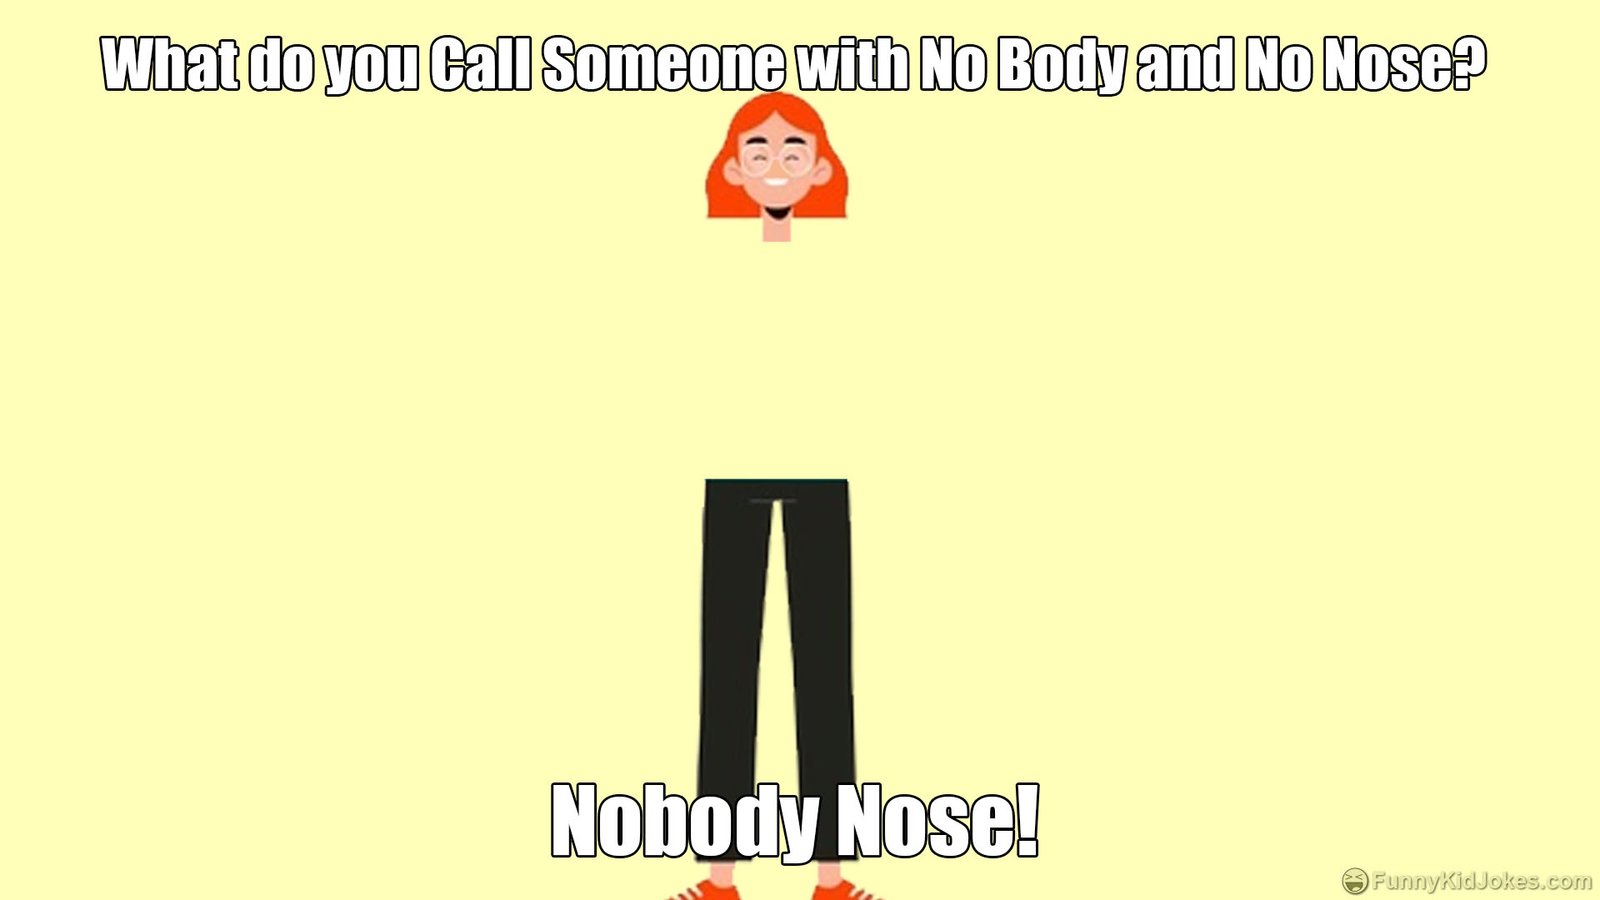 https://funnykidjokes.com/wp-content/uploads/2021/08/what-do-you-call-someone-with-no-body-and-no-nose.jpg